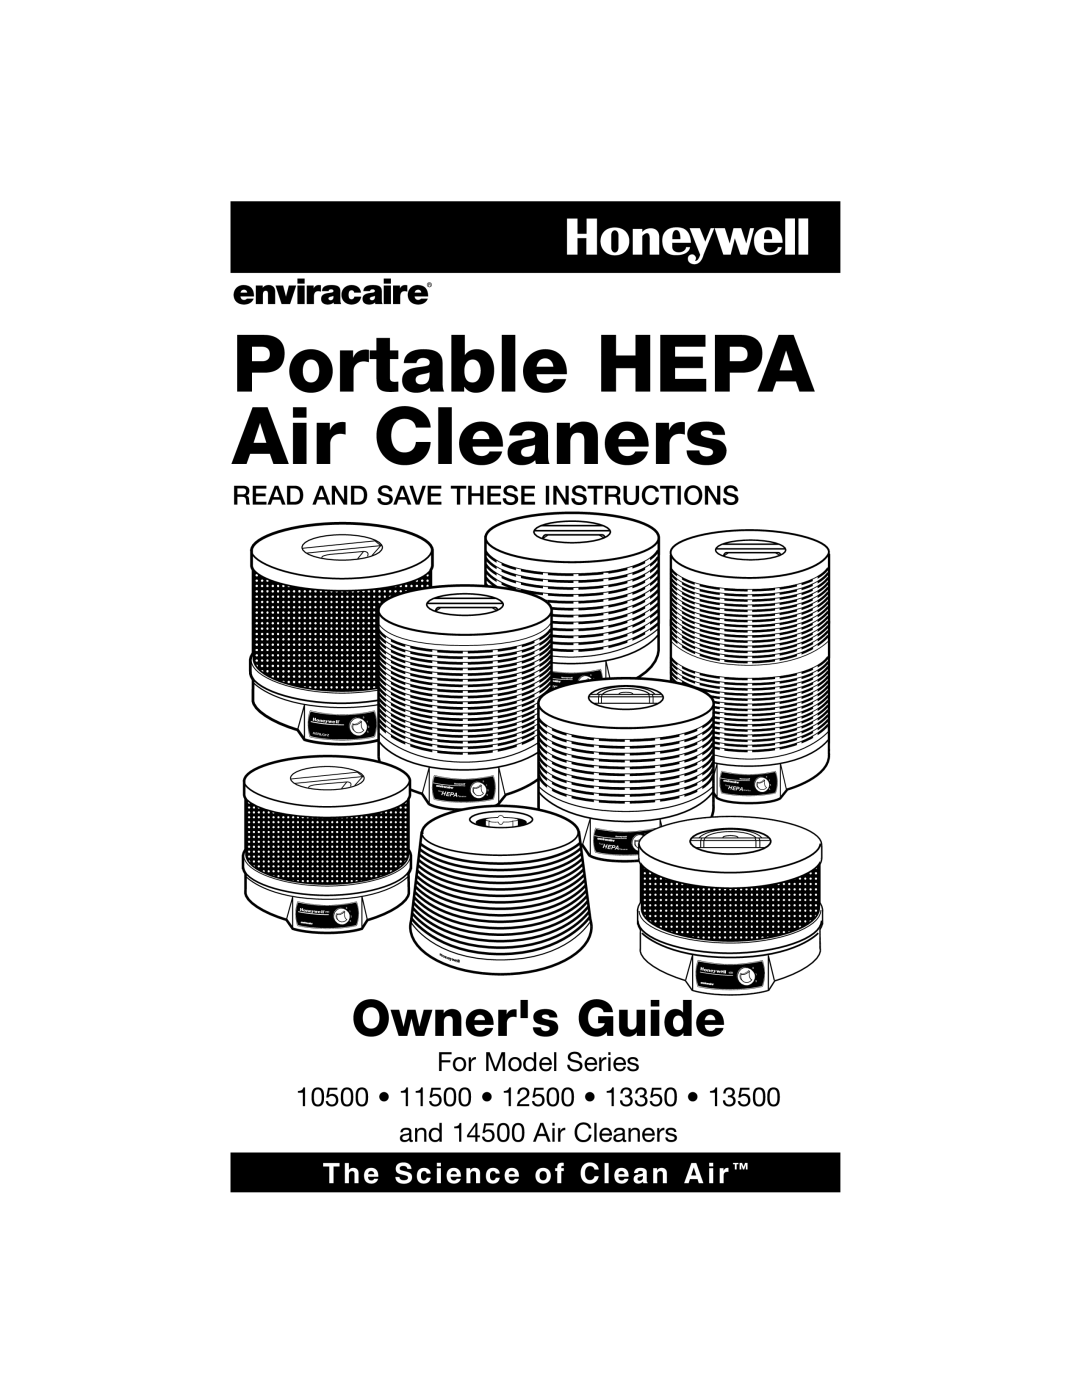 Honeywell 13350 manual Portable HEPA Air Cleaners, Owners Guide, The Science of Clean Air, For Model Series, Hepaf, 250i 